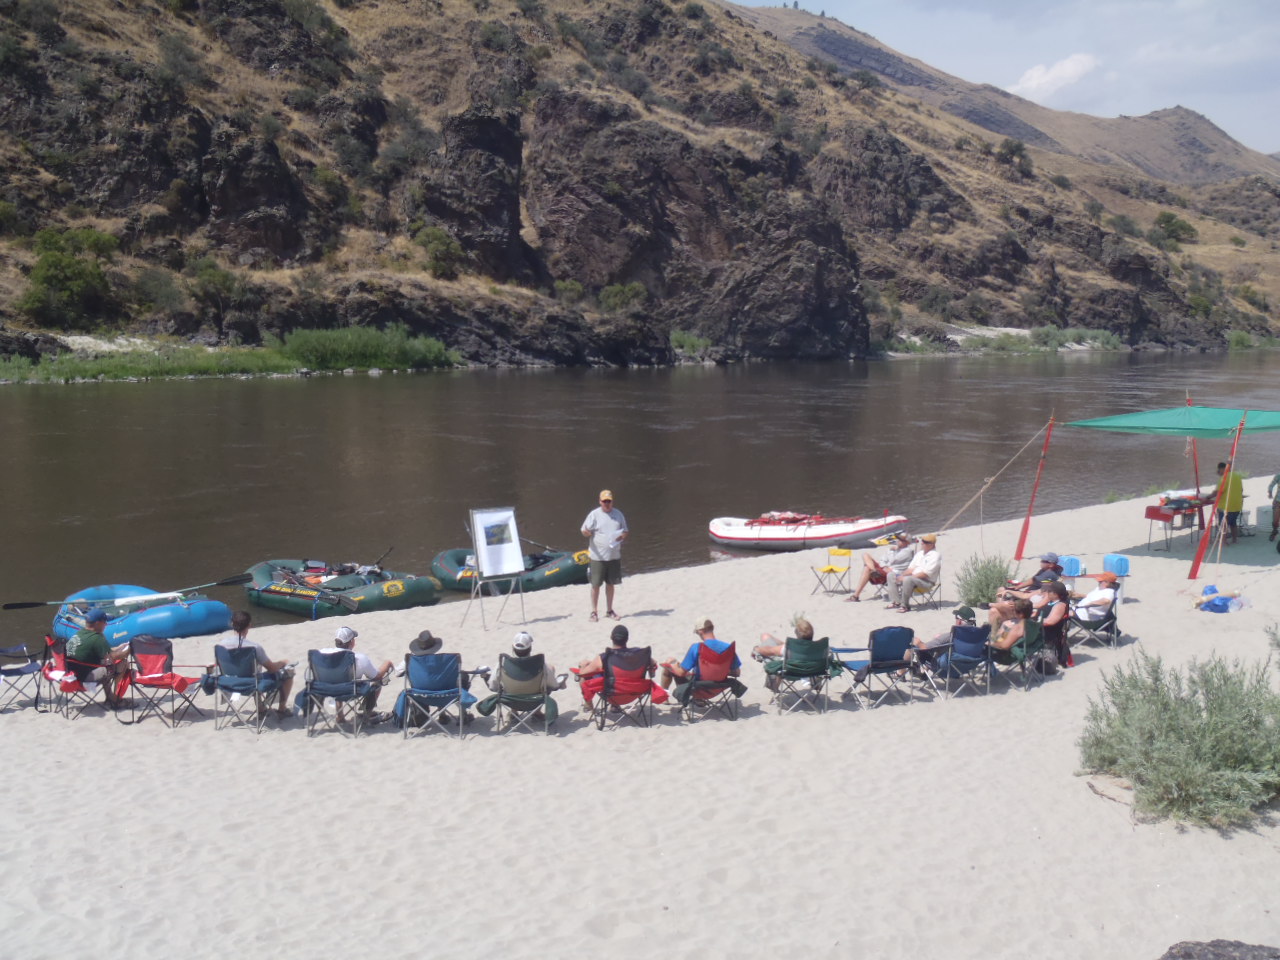 Workshop on the Salmon River